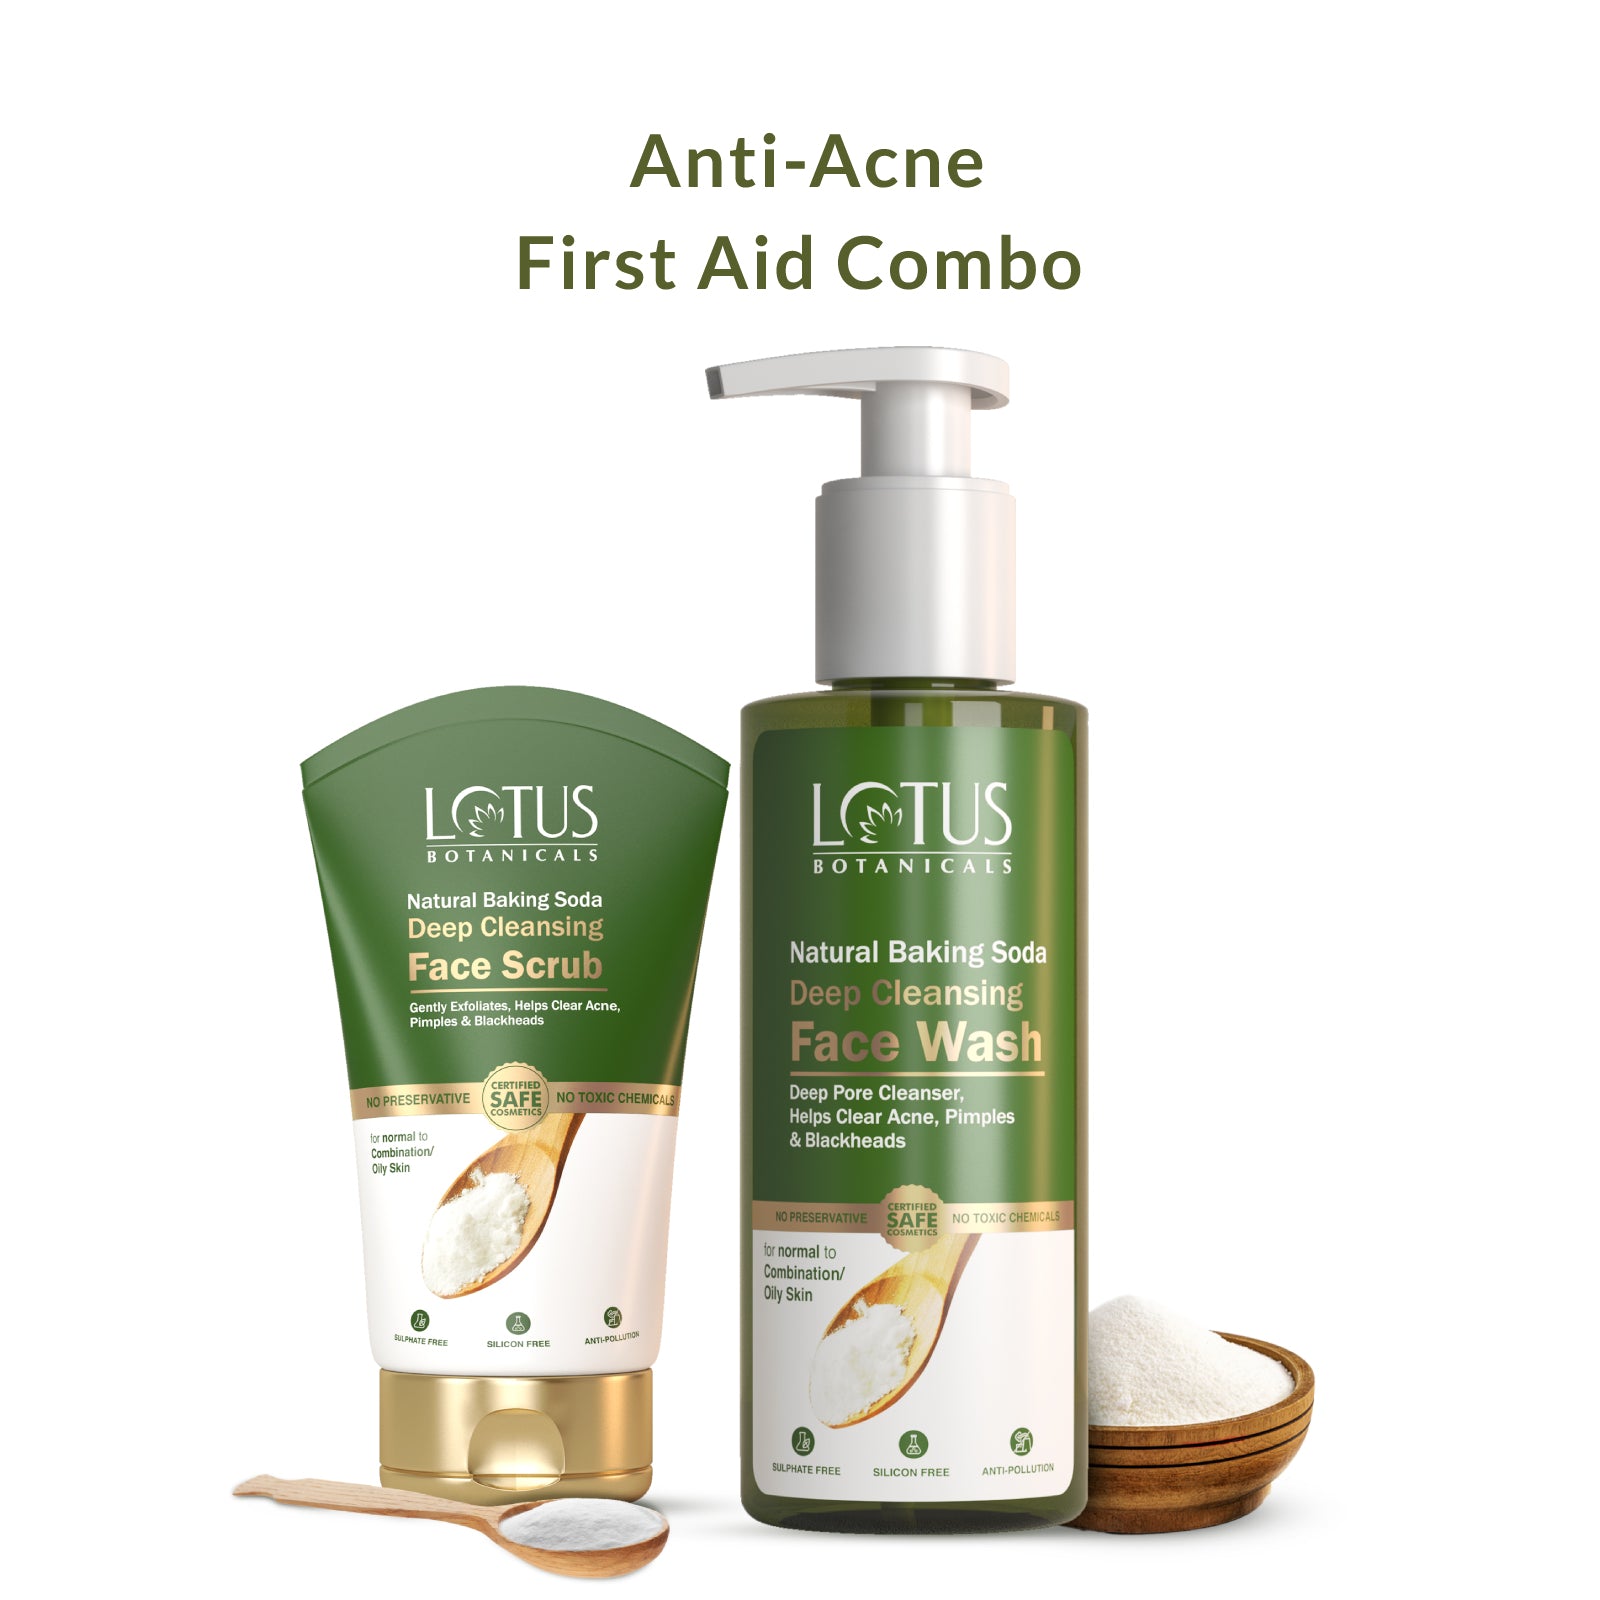 Effective Anti-Acne First Aid Combo with Cleanser, Spot Treatment, and Moisturizer - Say Goodbye to Blemishes and Achieve Clear and Healthy Skin